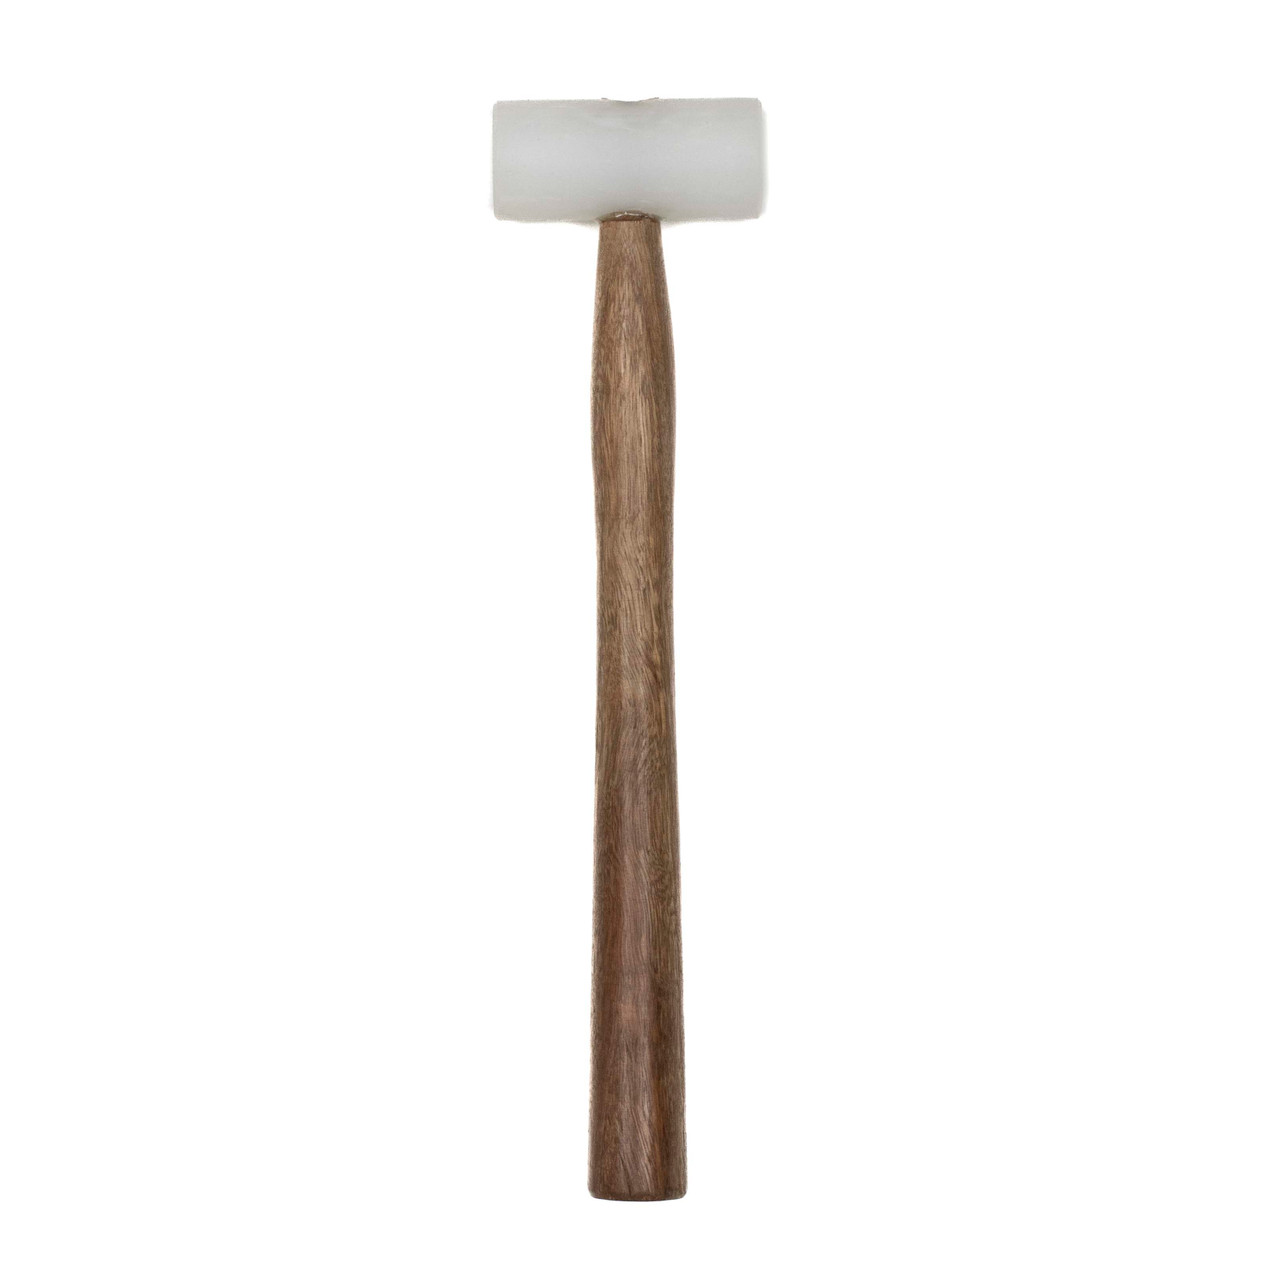 Nylon Hammer Dual Face Head Plastic Mallet Jewelry Making Tool 3/4 Face